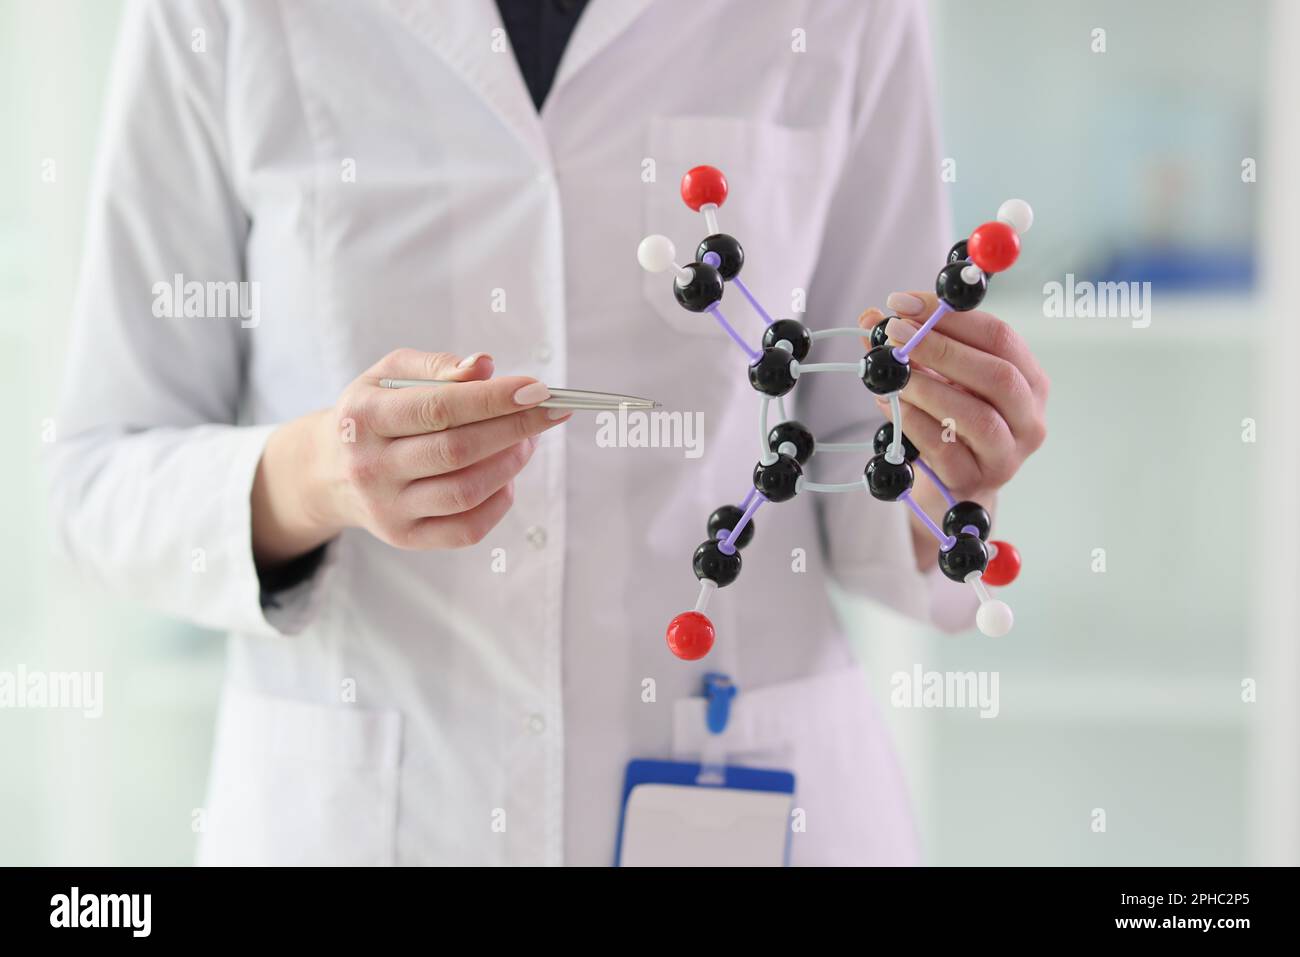 Lab assistant demonstrates molecule model close view Stock Photo